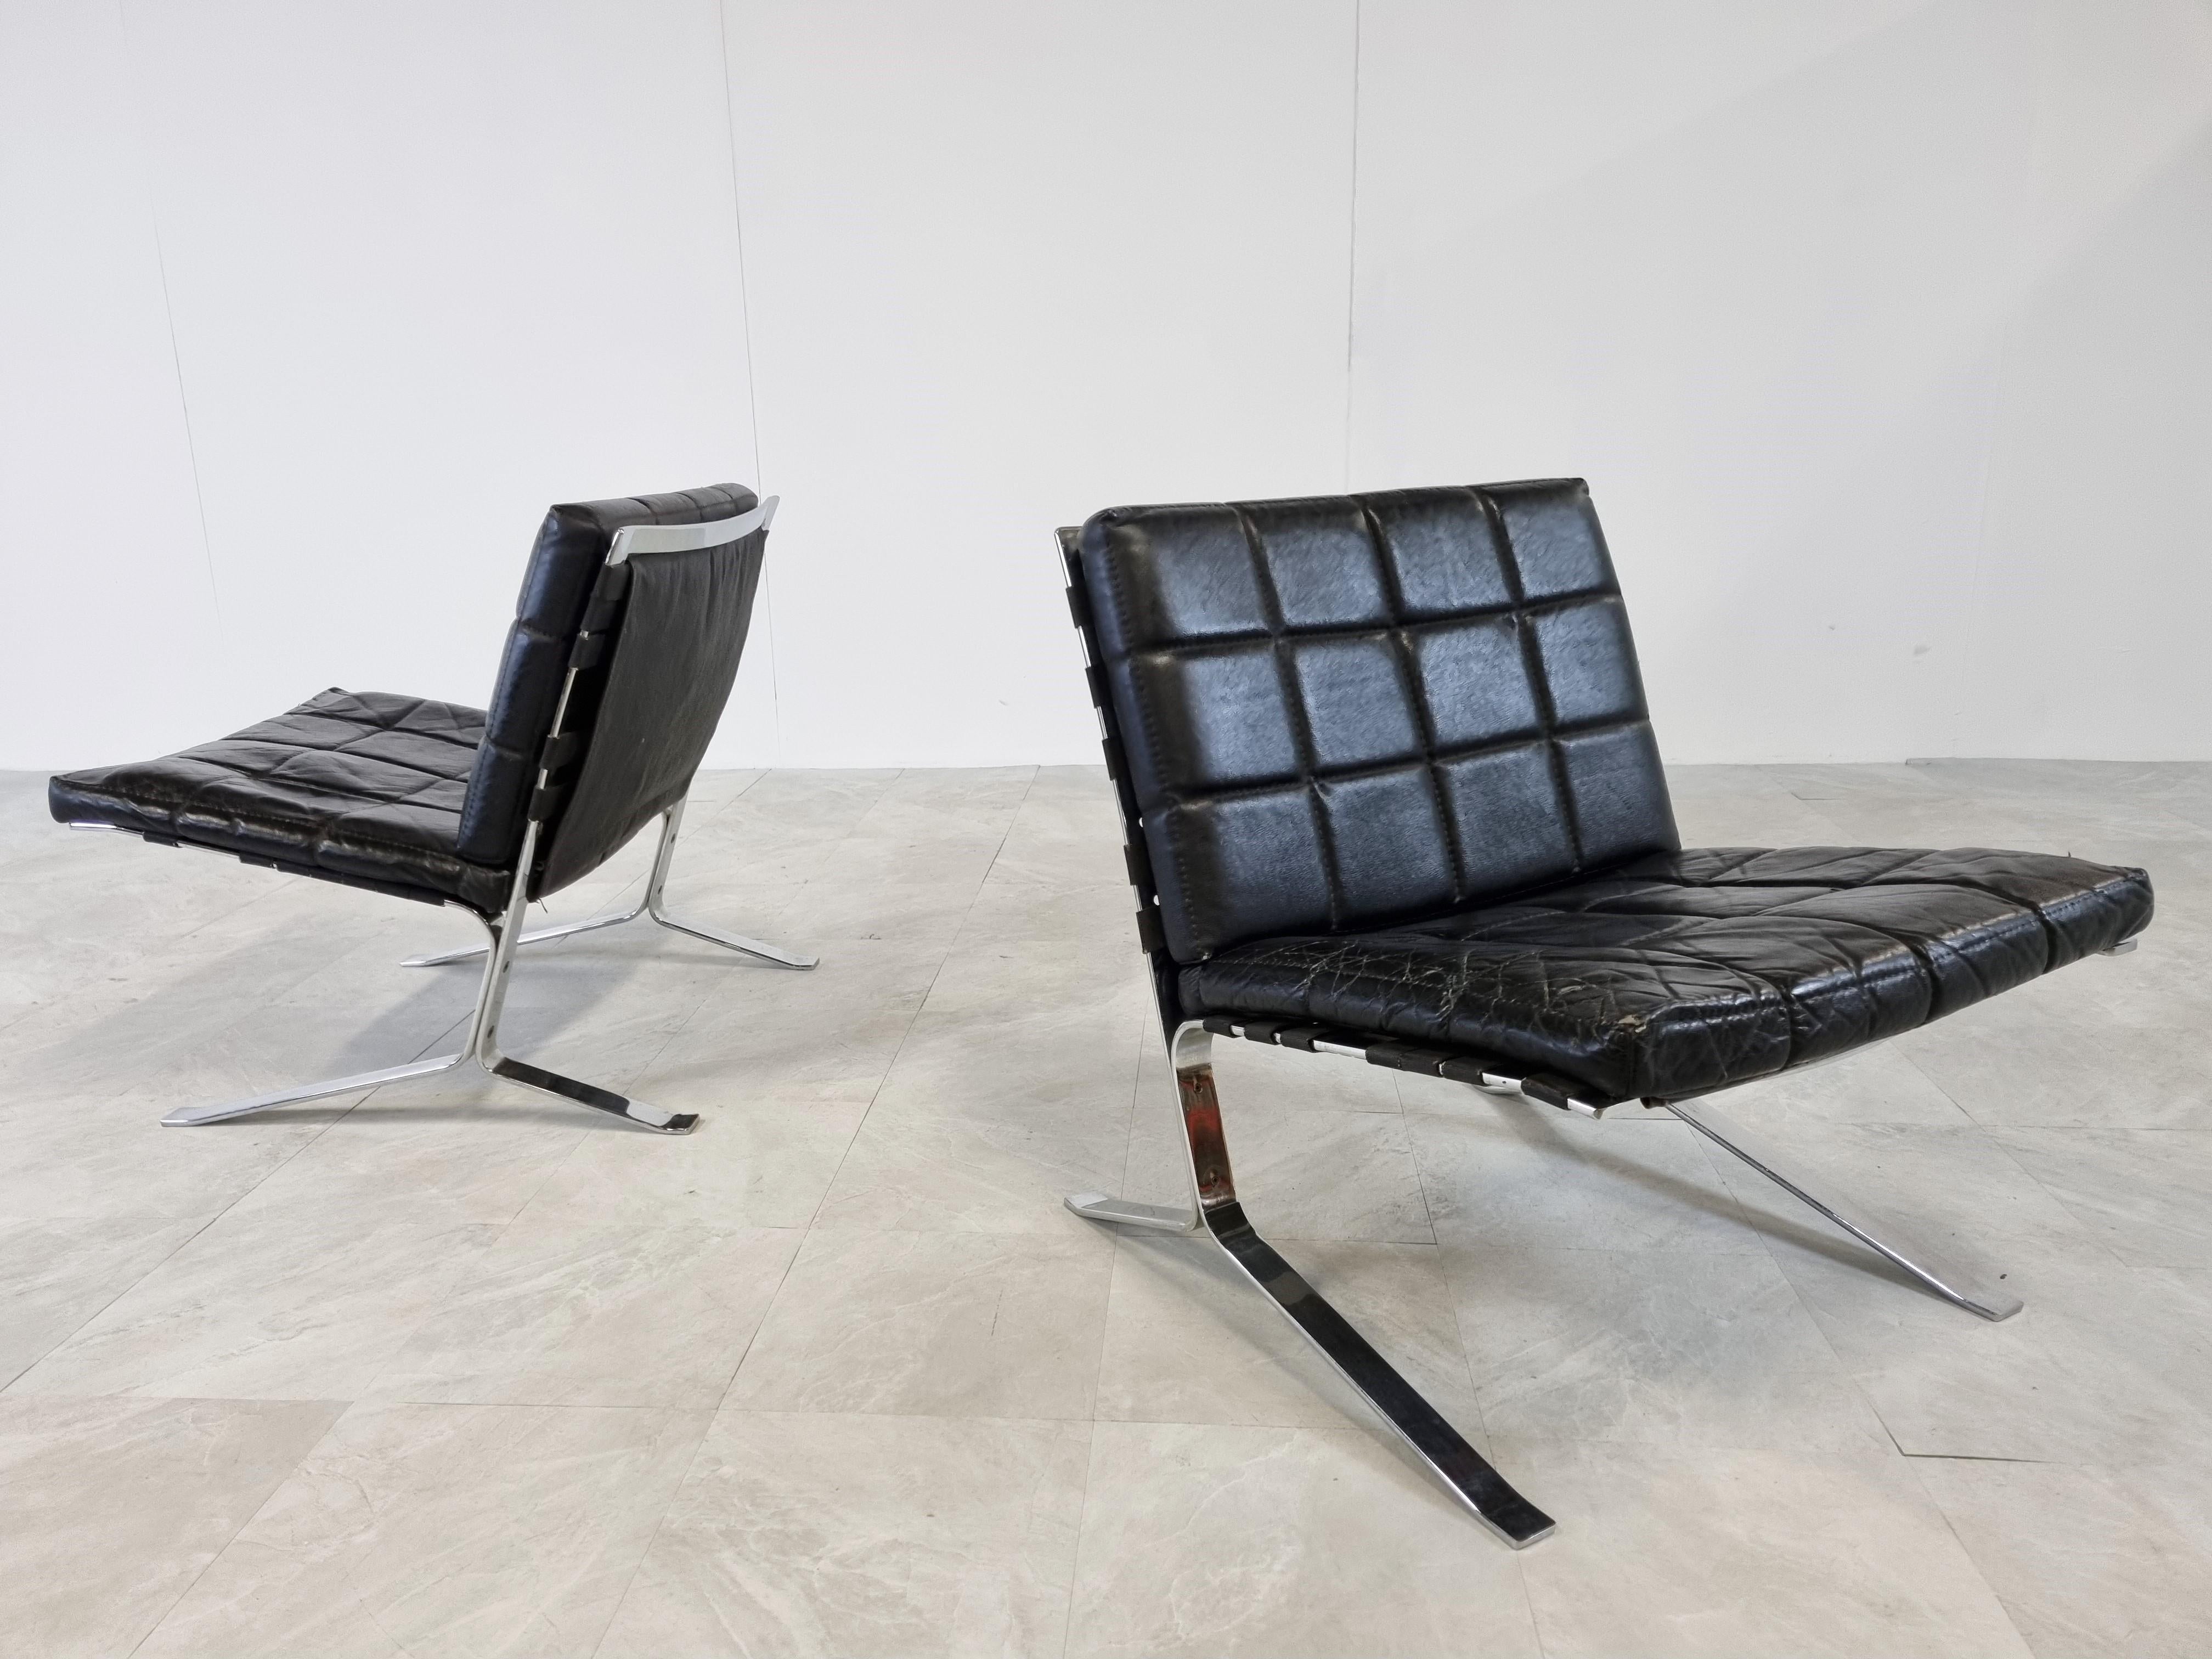 Pair of vintage Joker lounge chairs designed by Olivier Mourgue for Airborne International.

Beautiful, timeless designed chromed steel frames with their original black leather upholstery.

1970s - France

Condition: Overall good condition,